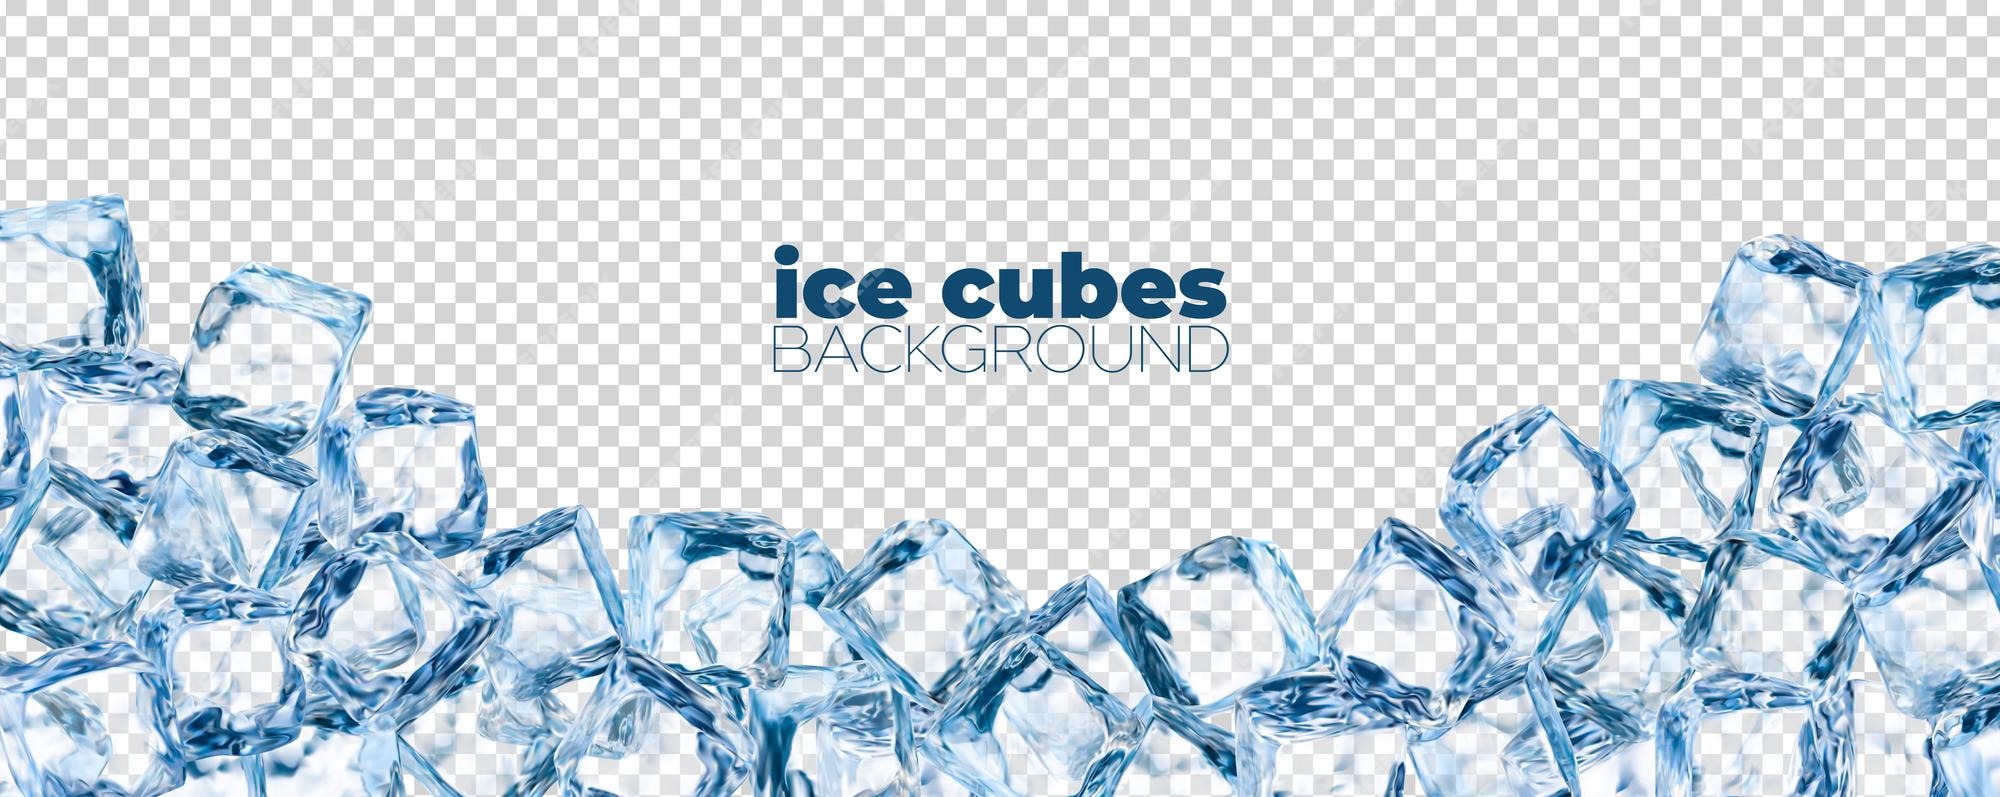 Premium Vector | Realistic ice cubes background, crystal ice blocks frame,  isolated border of blue transparent frozen water cubes. 3d vector glass or  icy solid pieces for drink ad with clean square